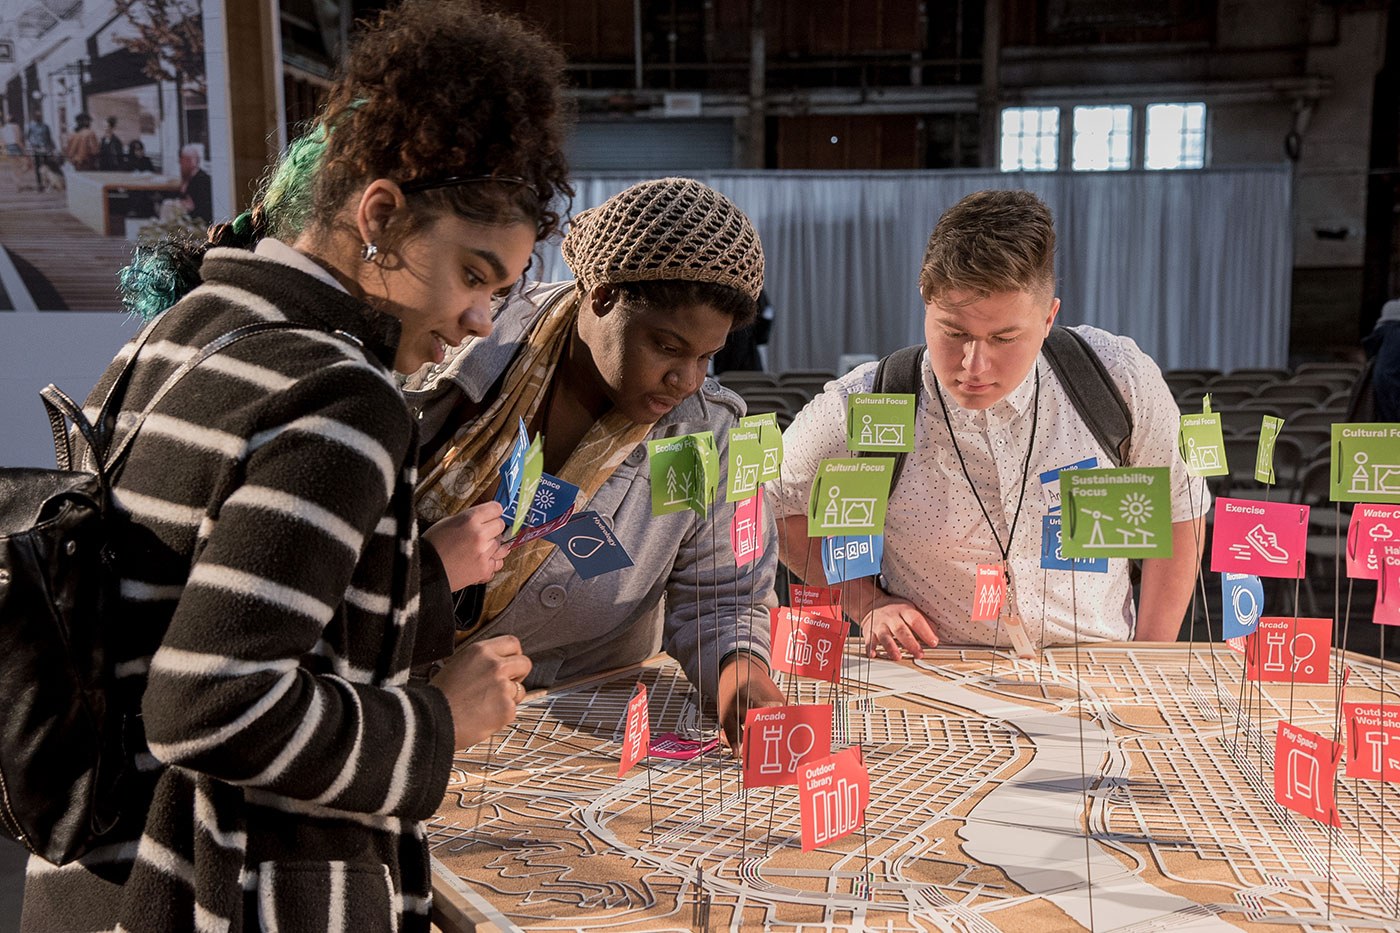 Group of people leaning over a large 3D map of portland